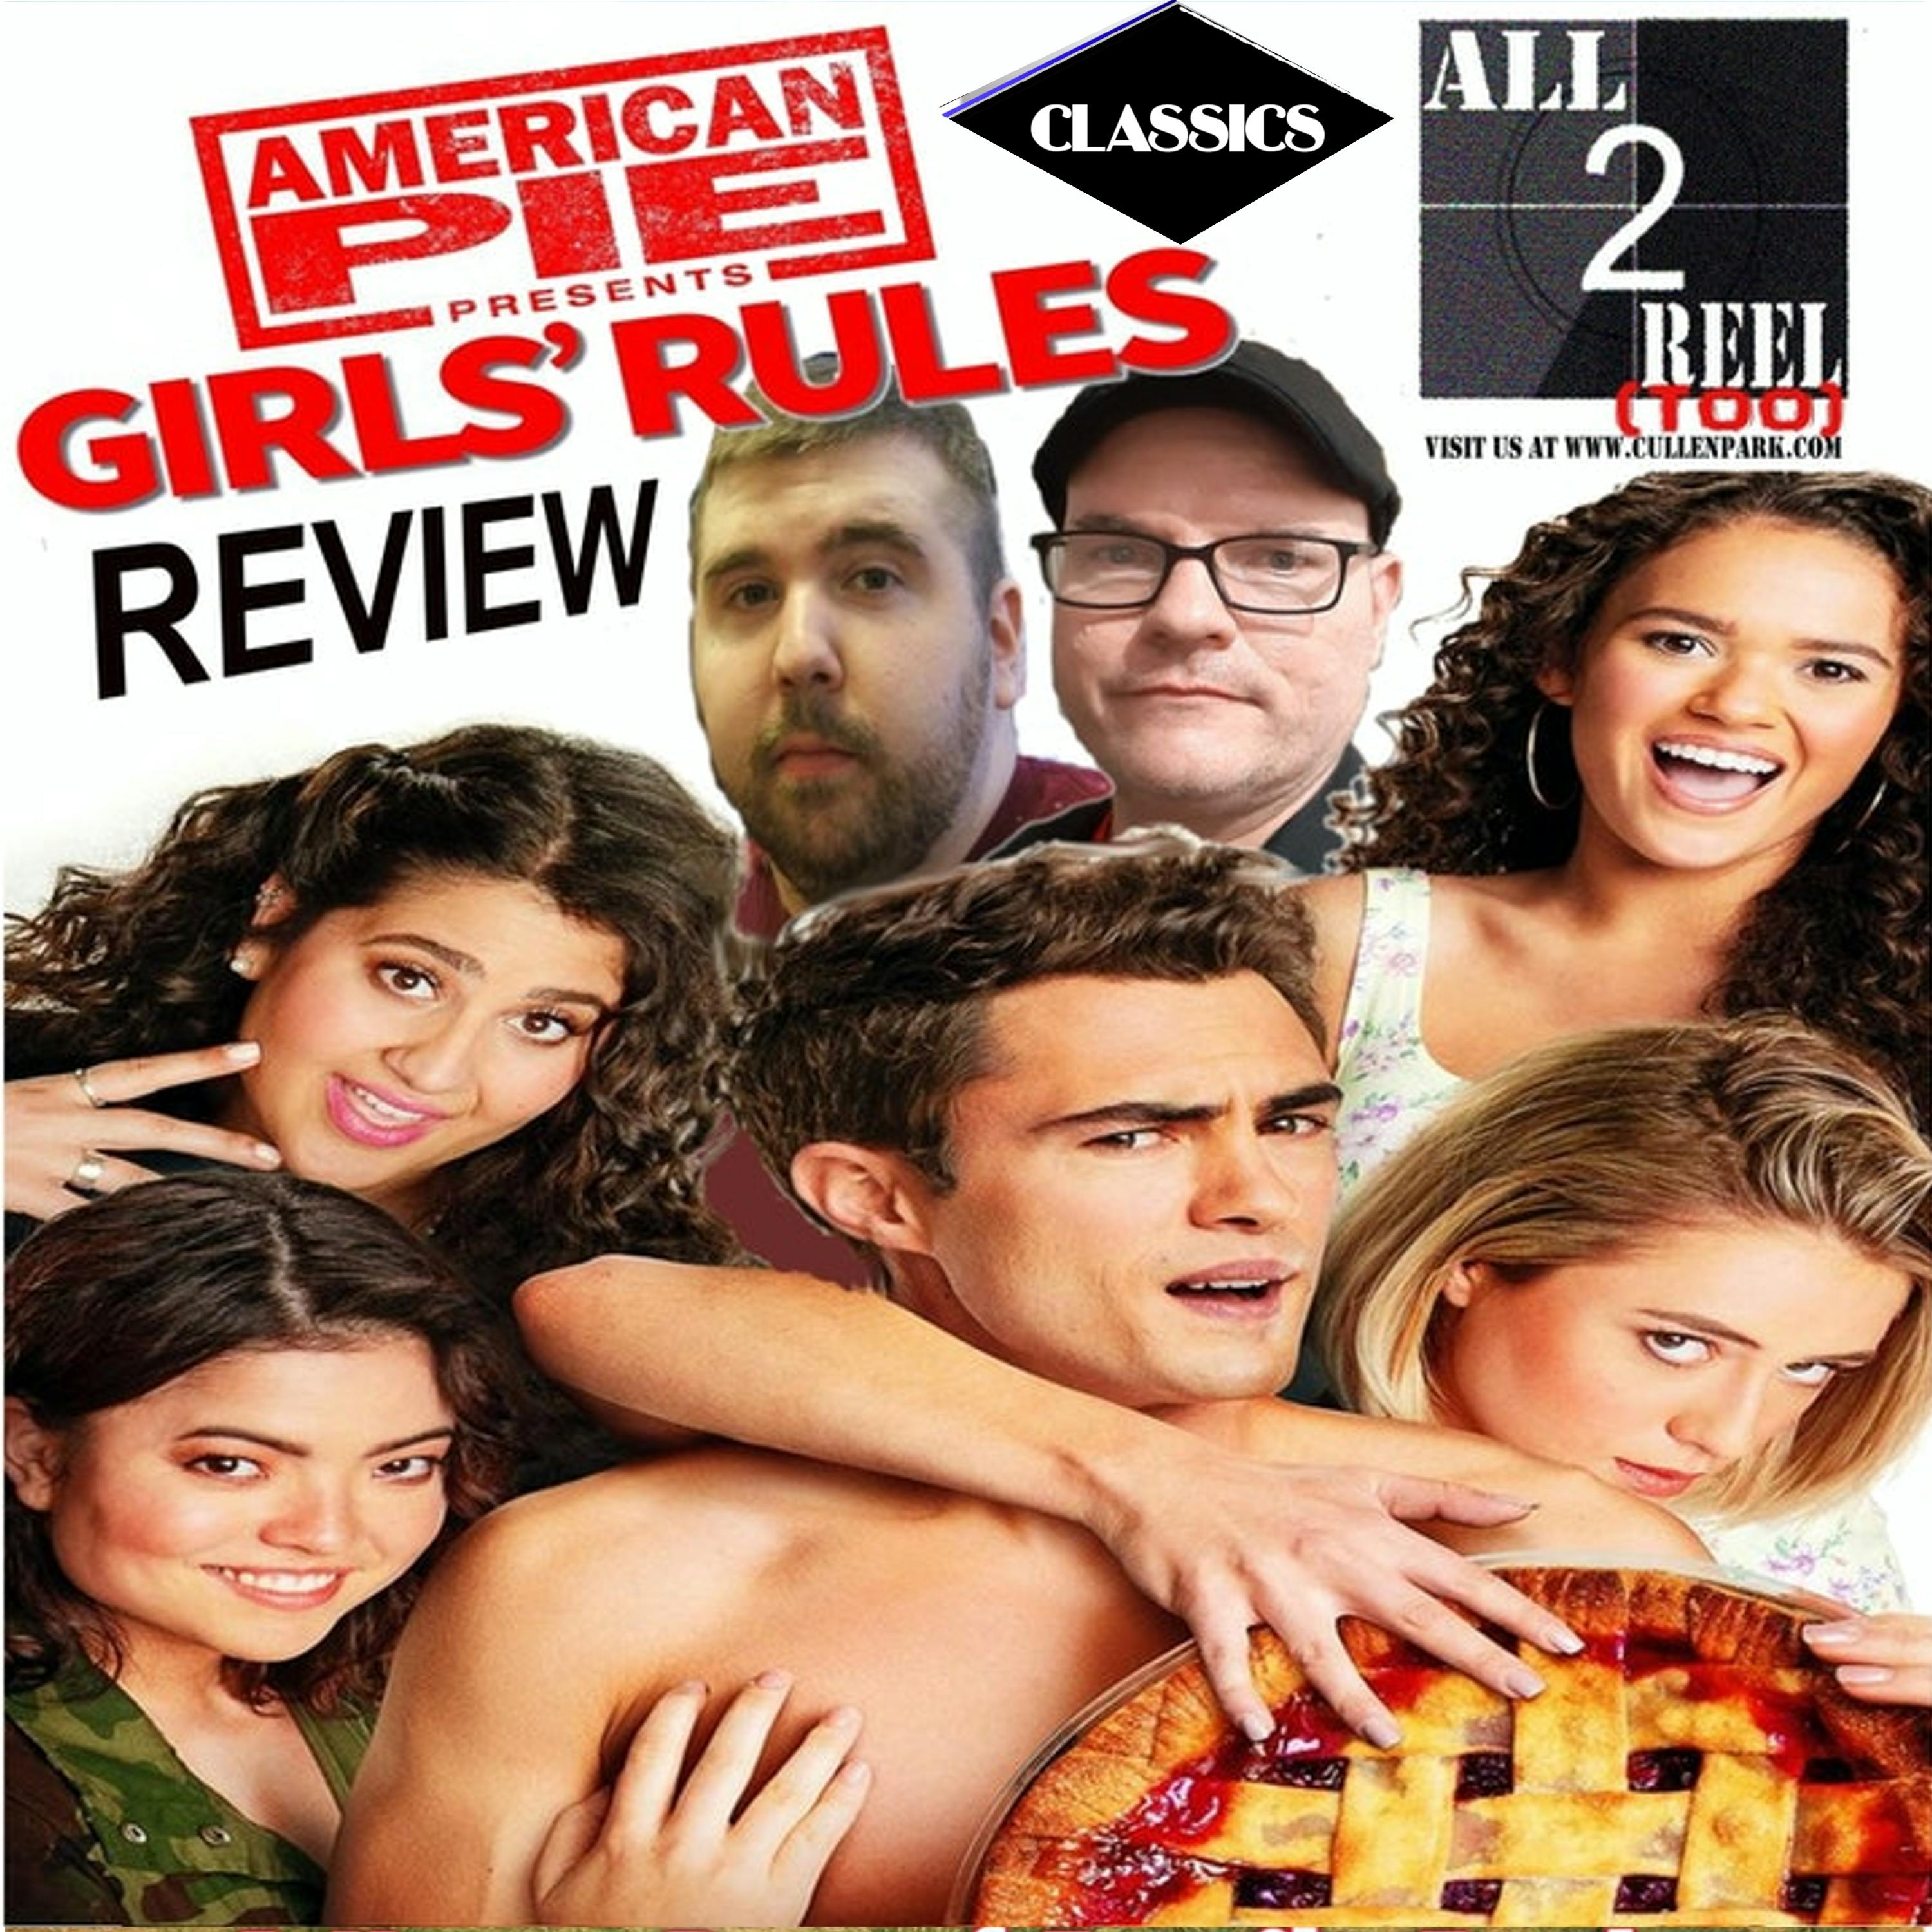 ALL2REELTOO CLASSICS -American Pie Presents: Girls' Rules (2020)  - Direct from Hell